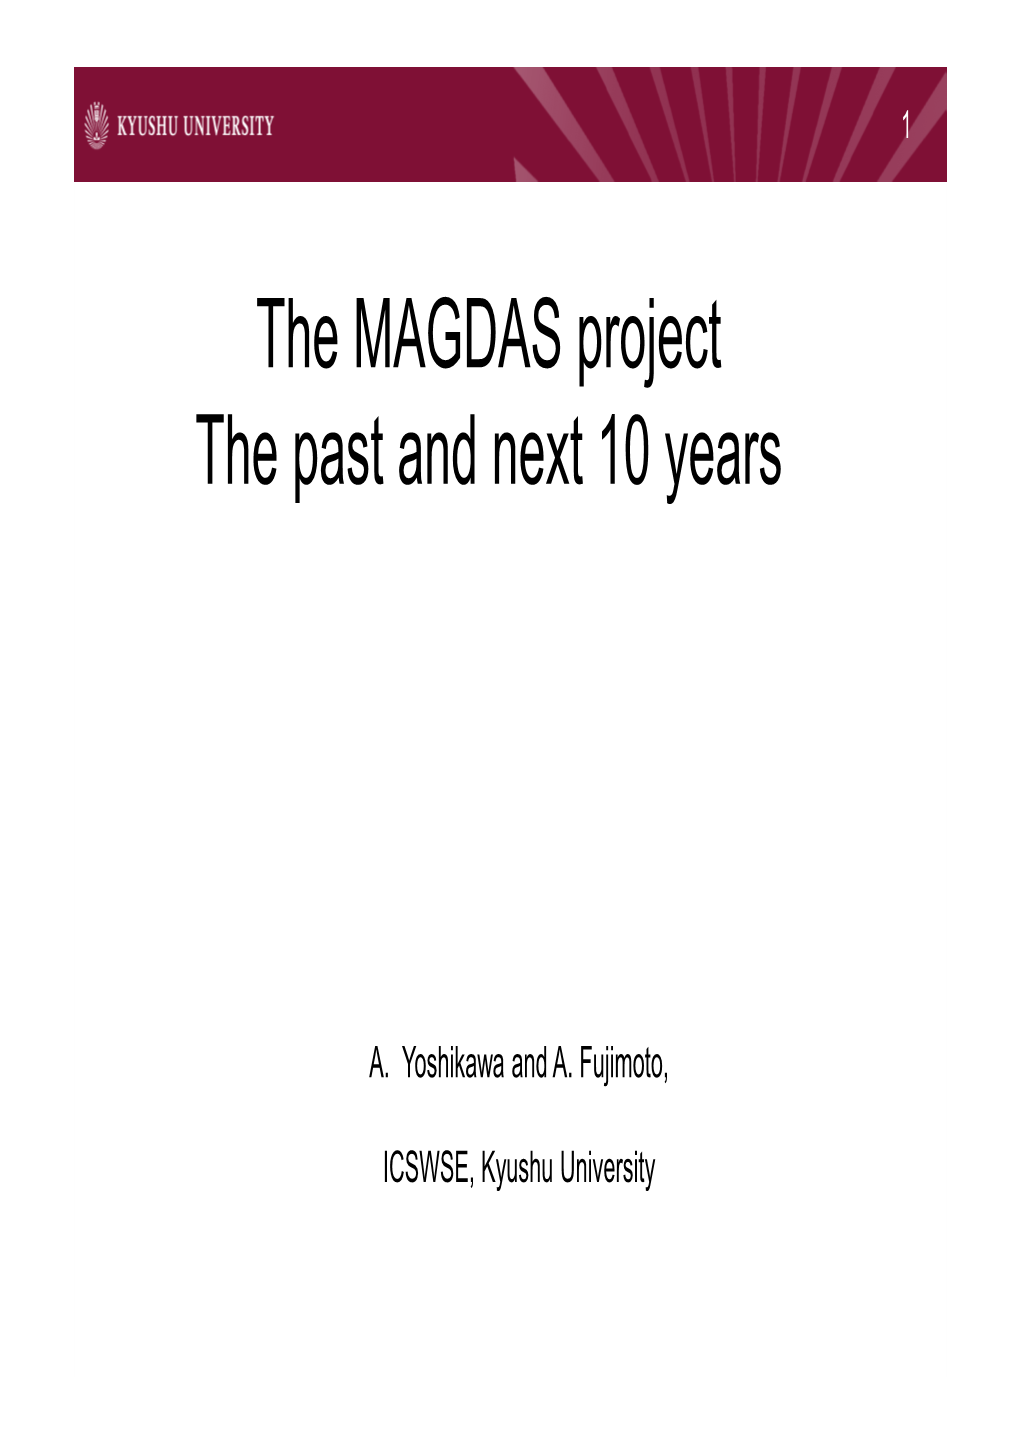 The MAGDAS Project the Past and Next 10 Years